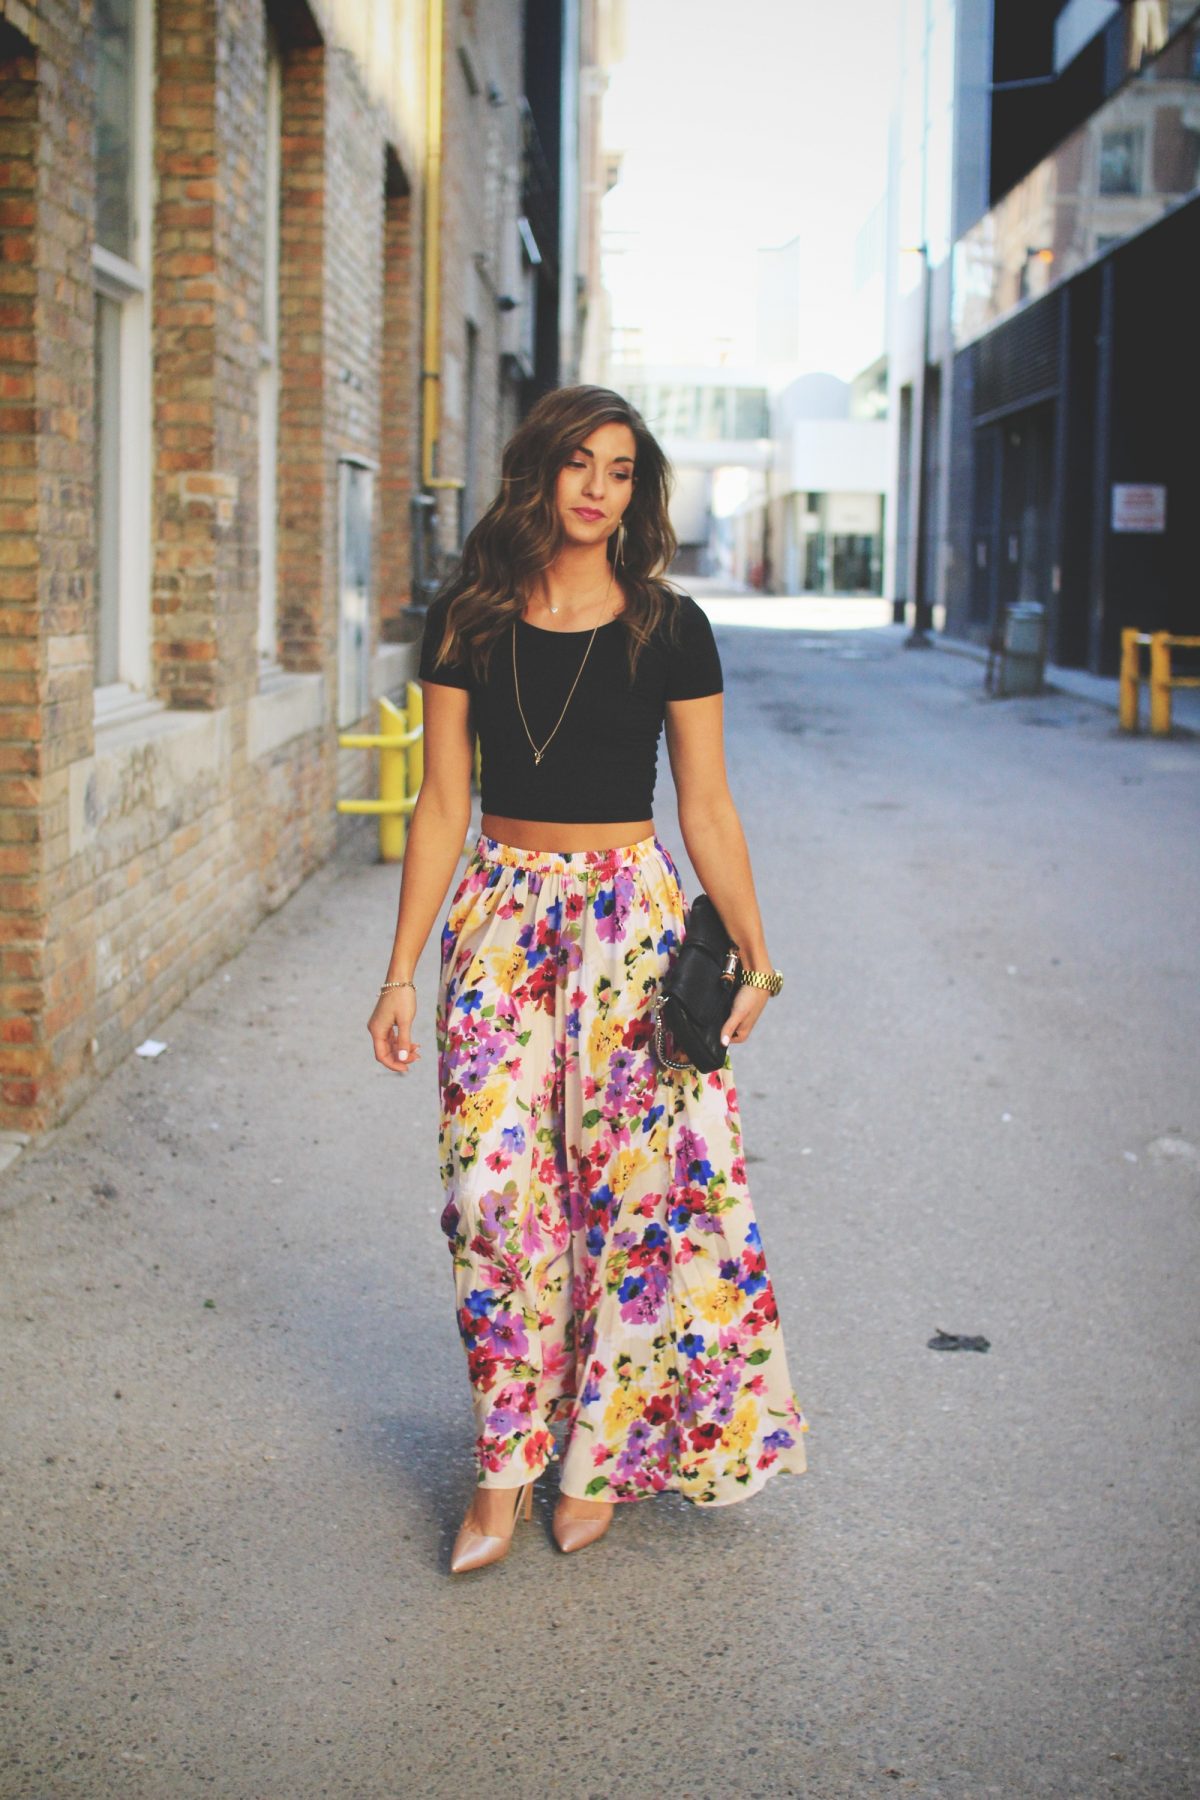 My Floral Obsession - Teach Me Style - A style, beauty and life blog.